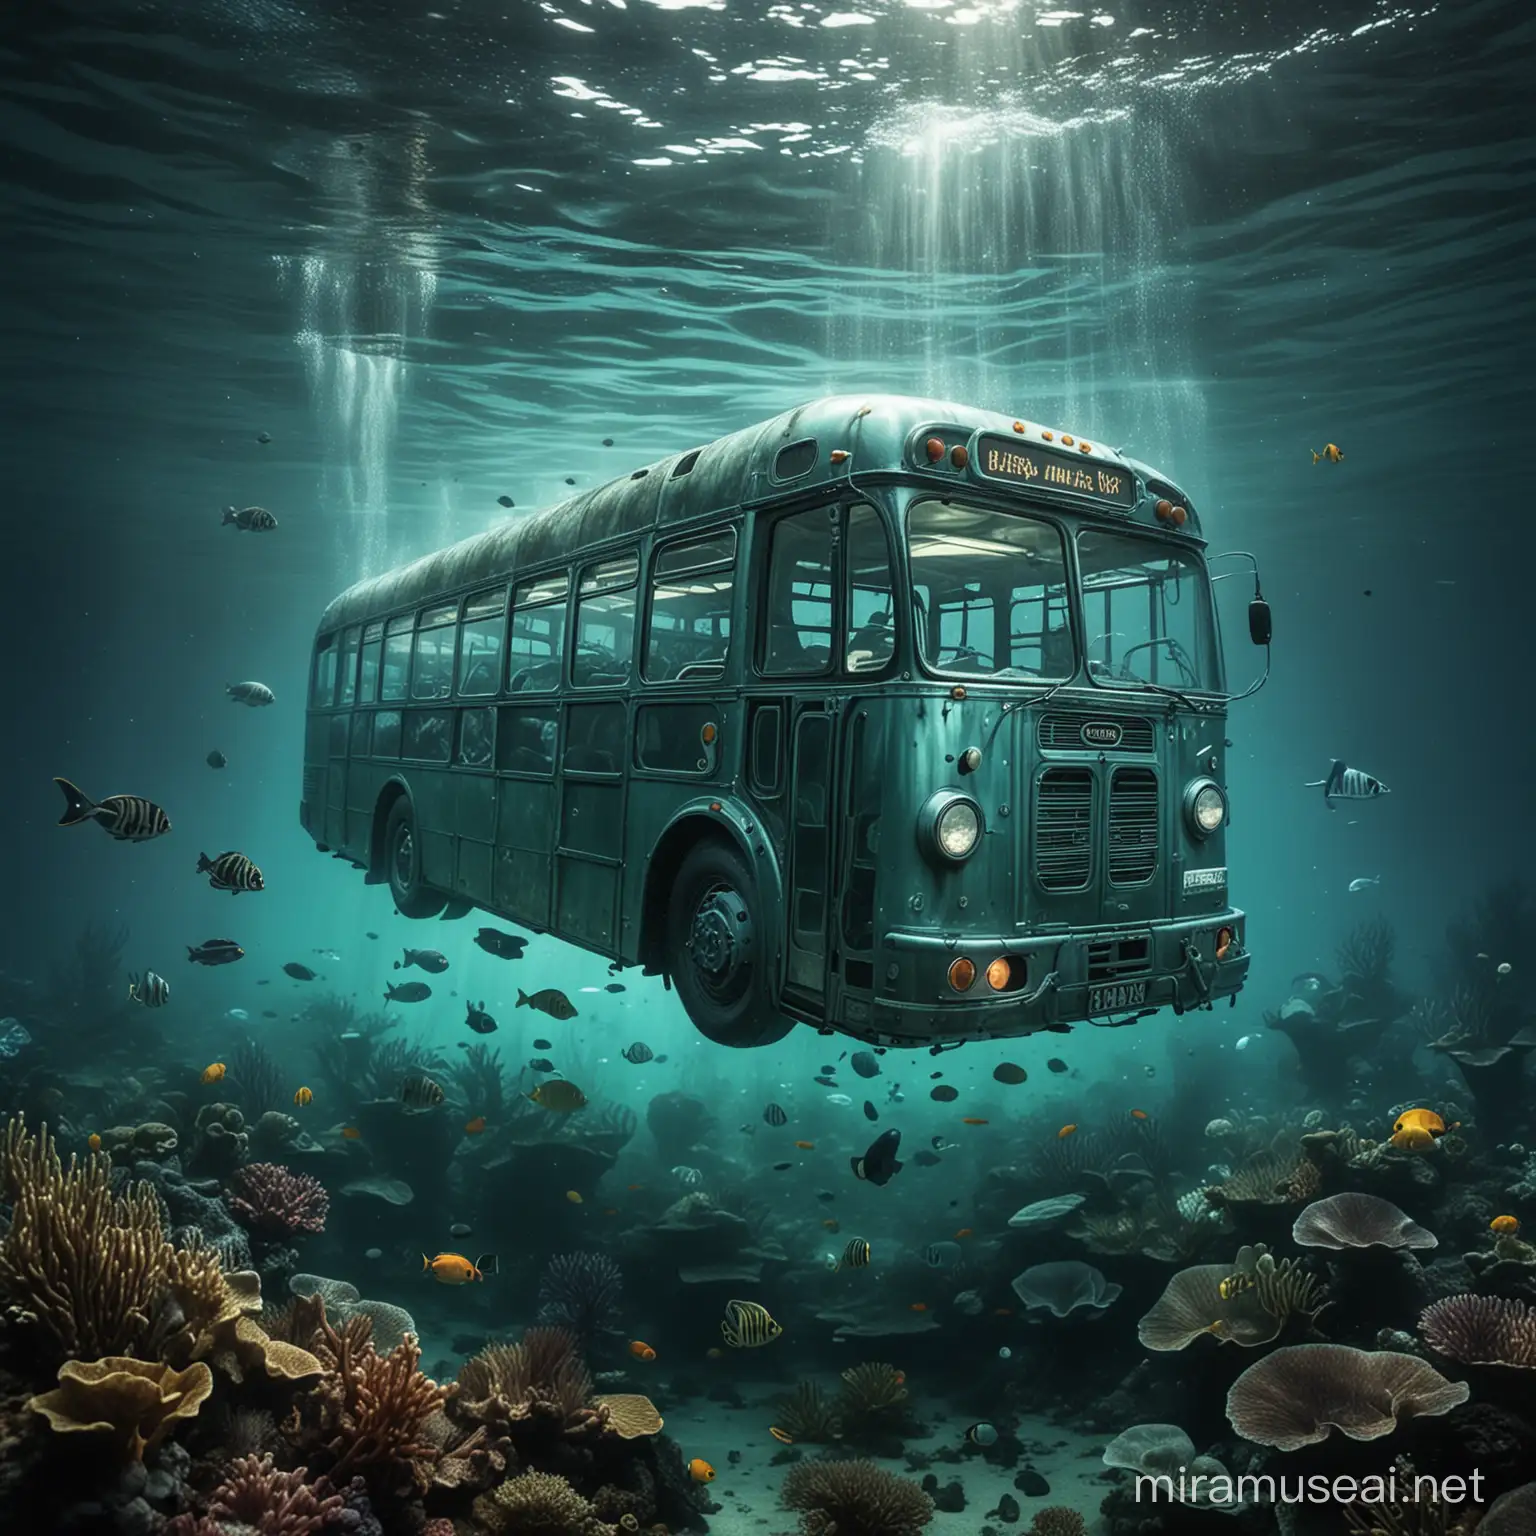 A bus in a style of Underwater Fantasy
